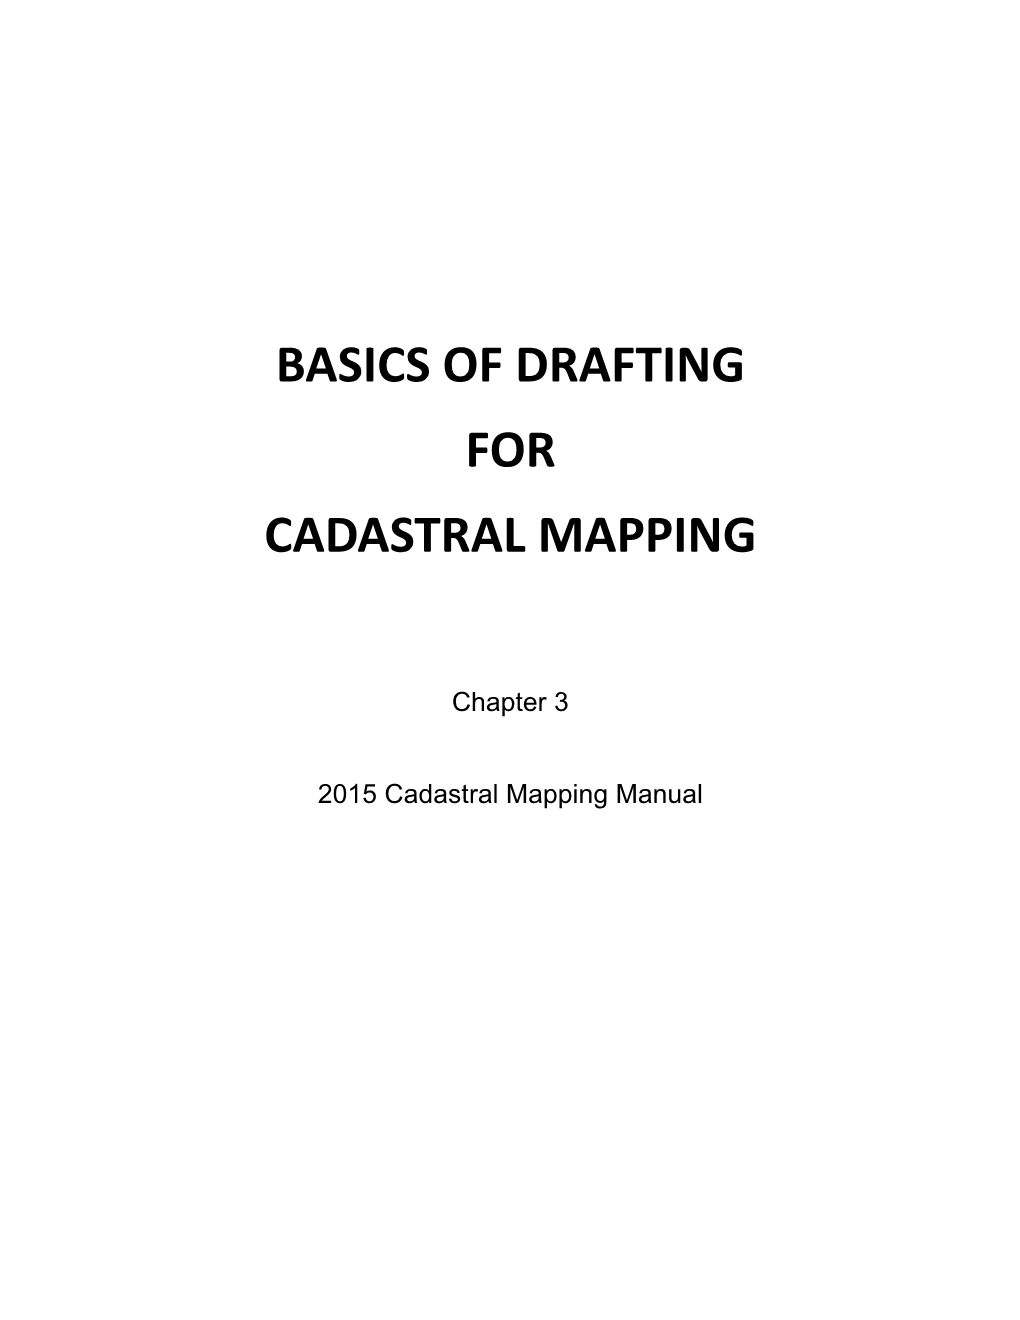 Basics of Drafting for Cadastral Mapping